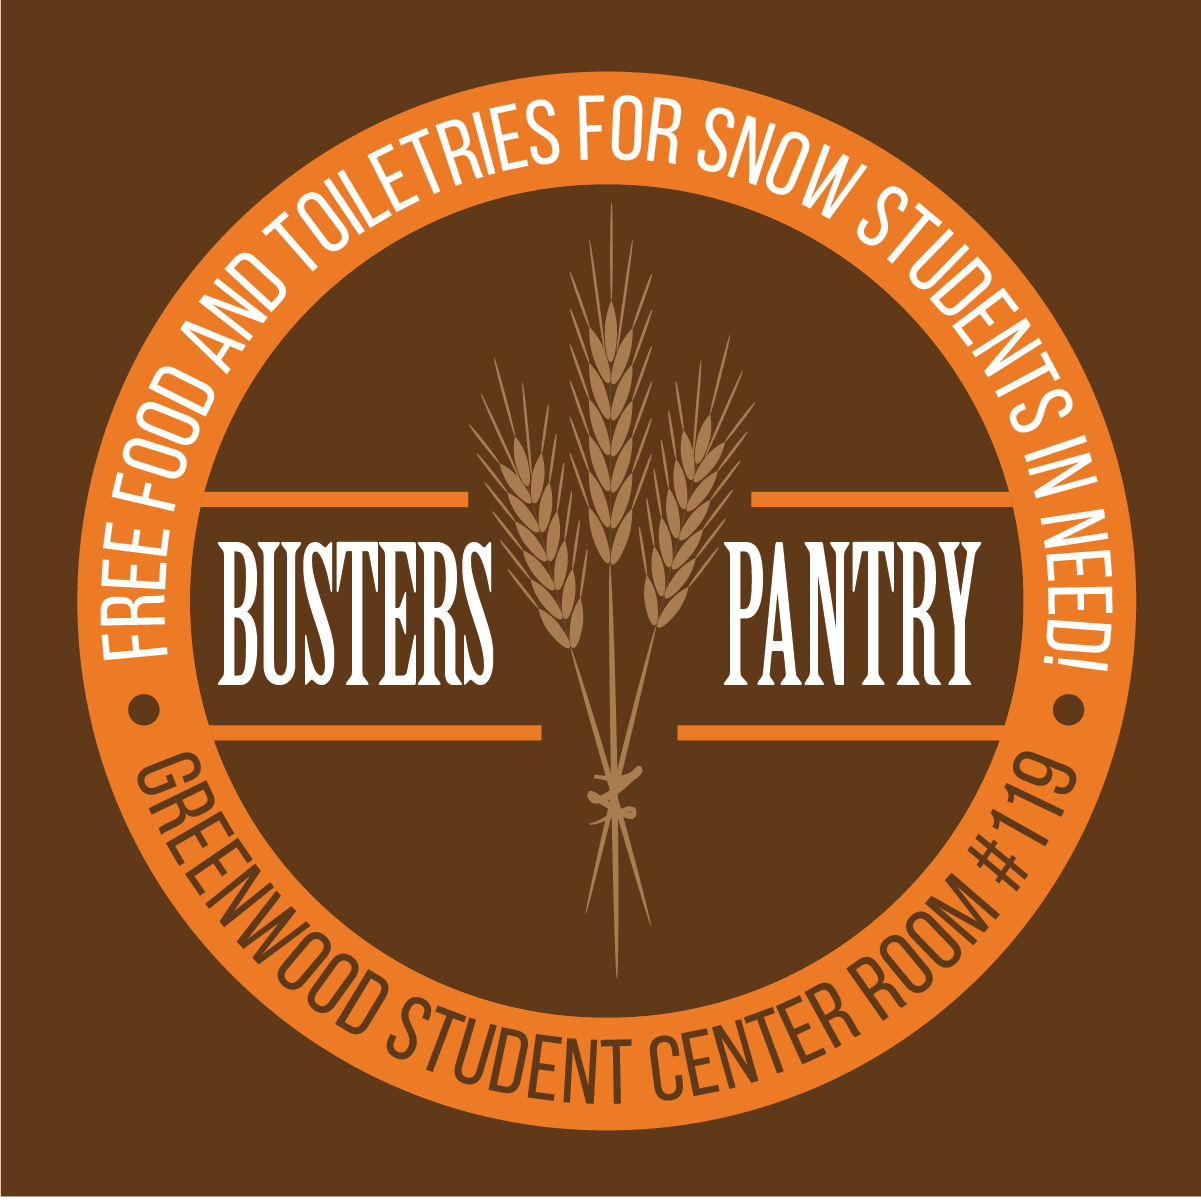 Busters Pantry